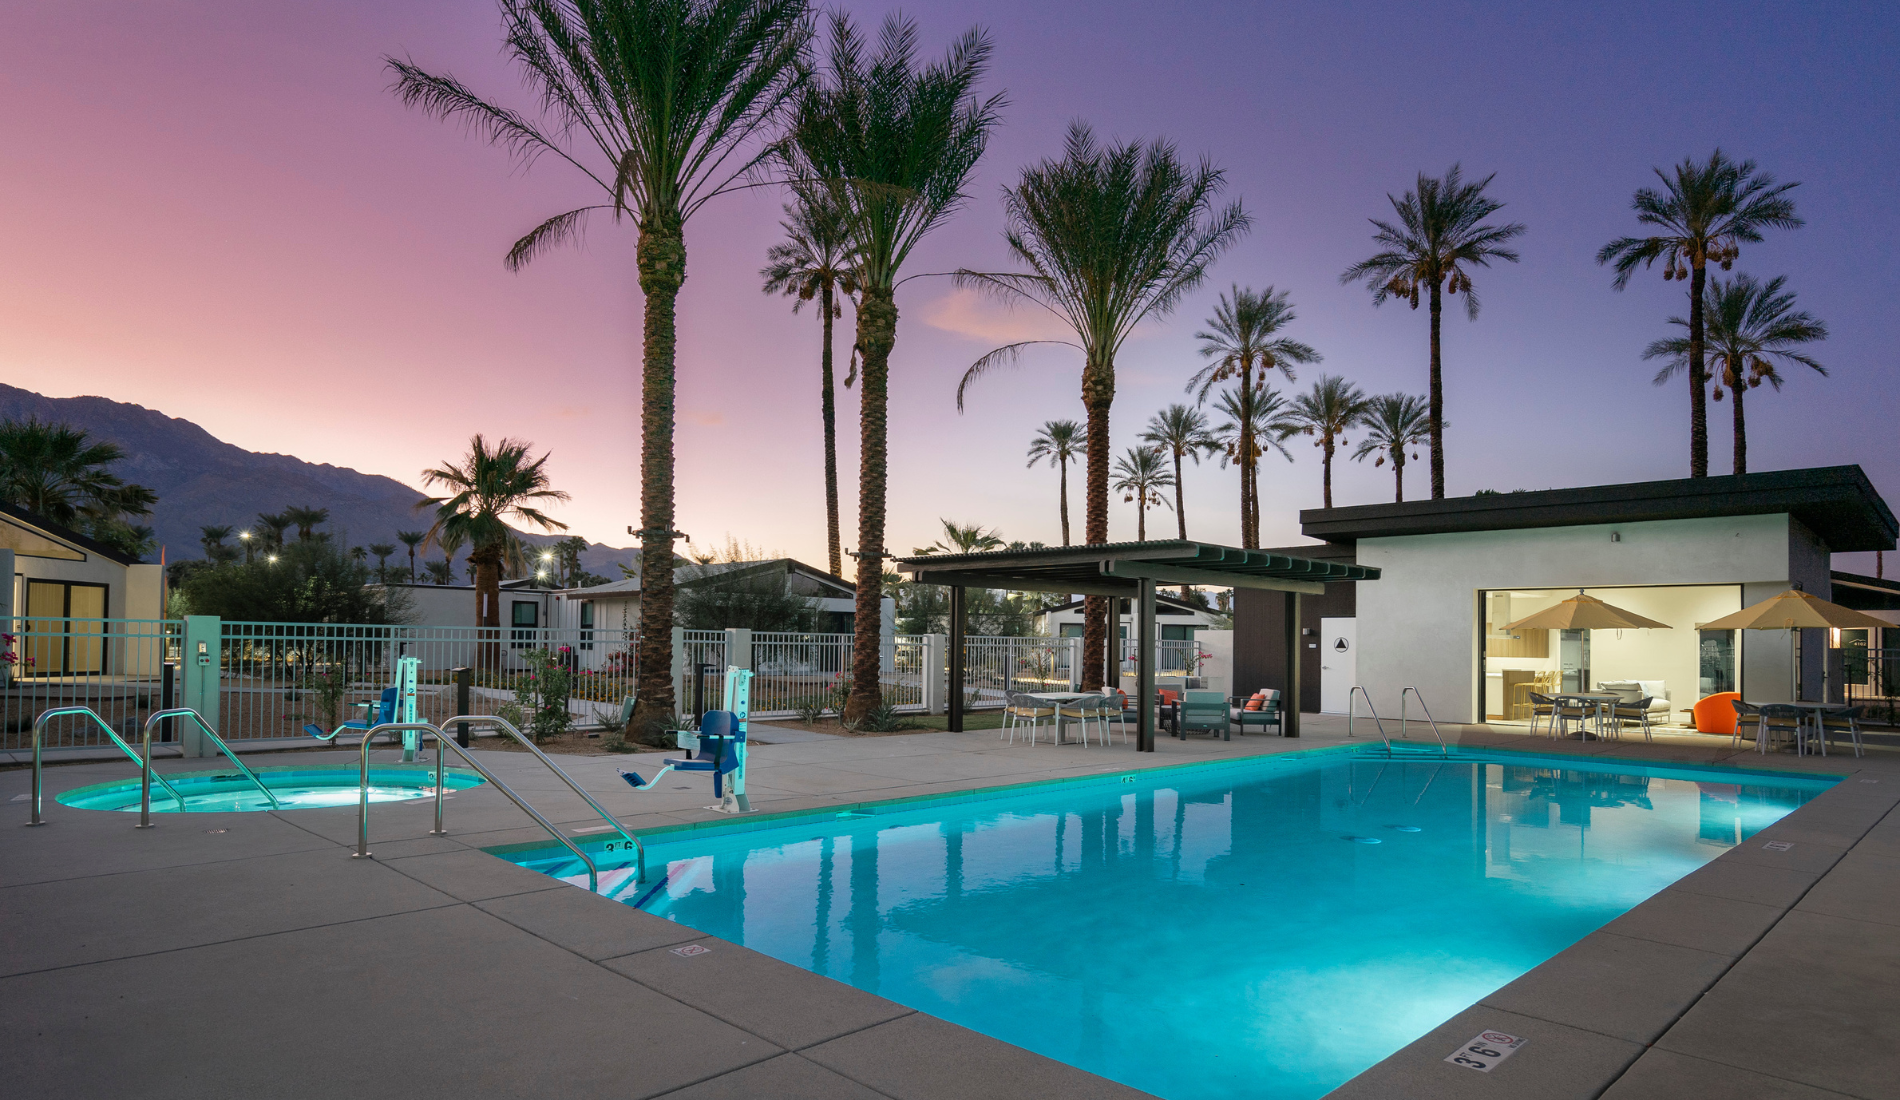 Palm Springs luxury modern resort, pool at dusk with palm trees and buildings